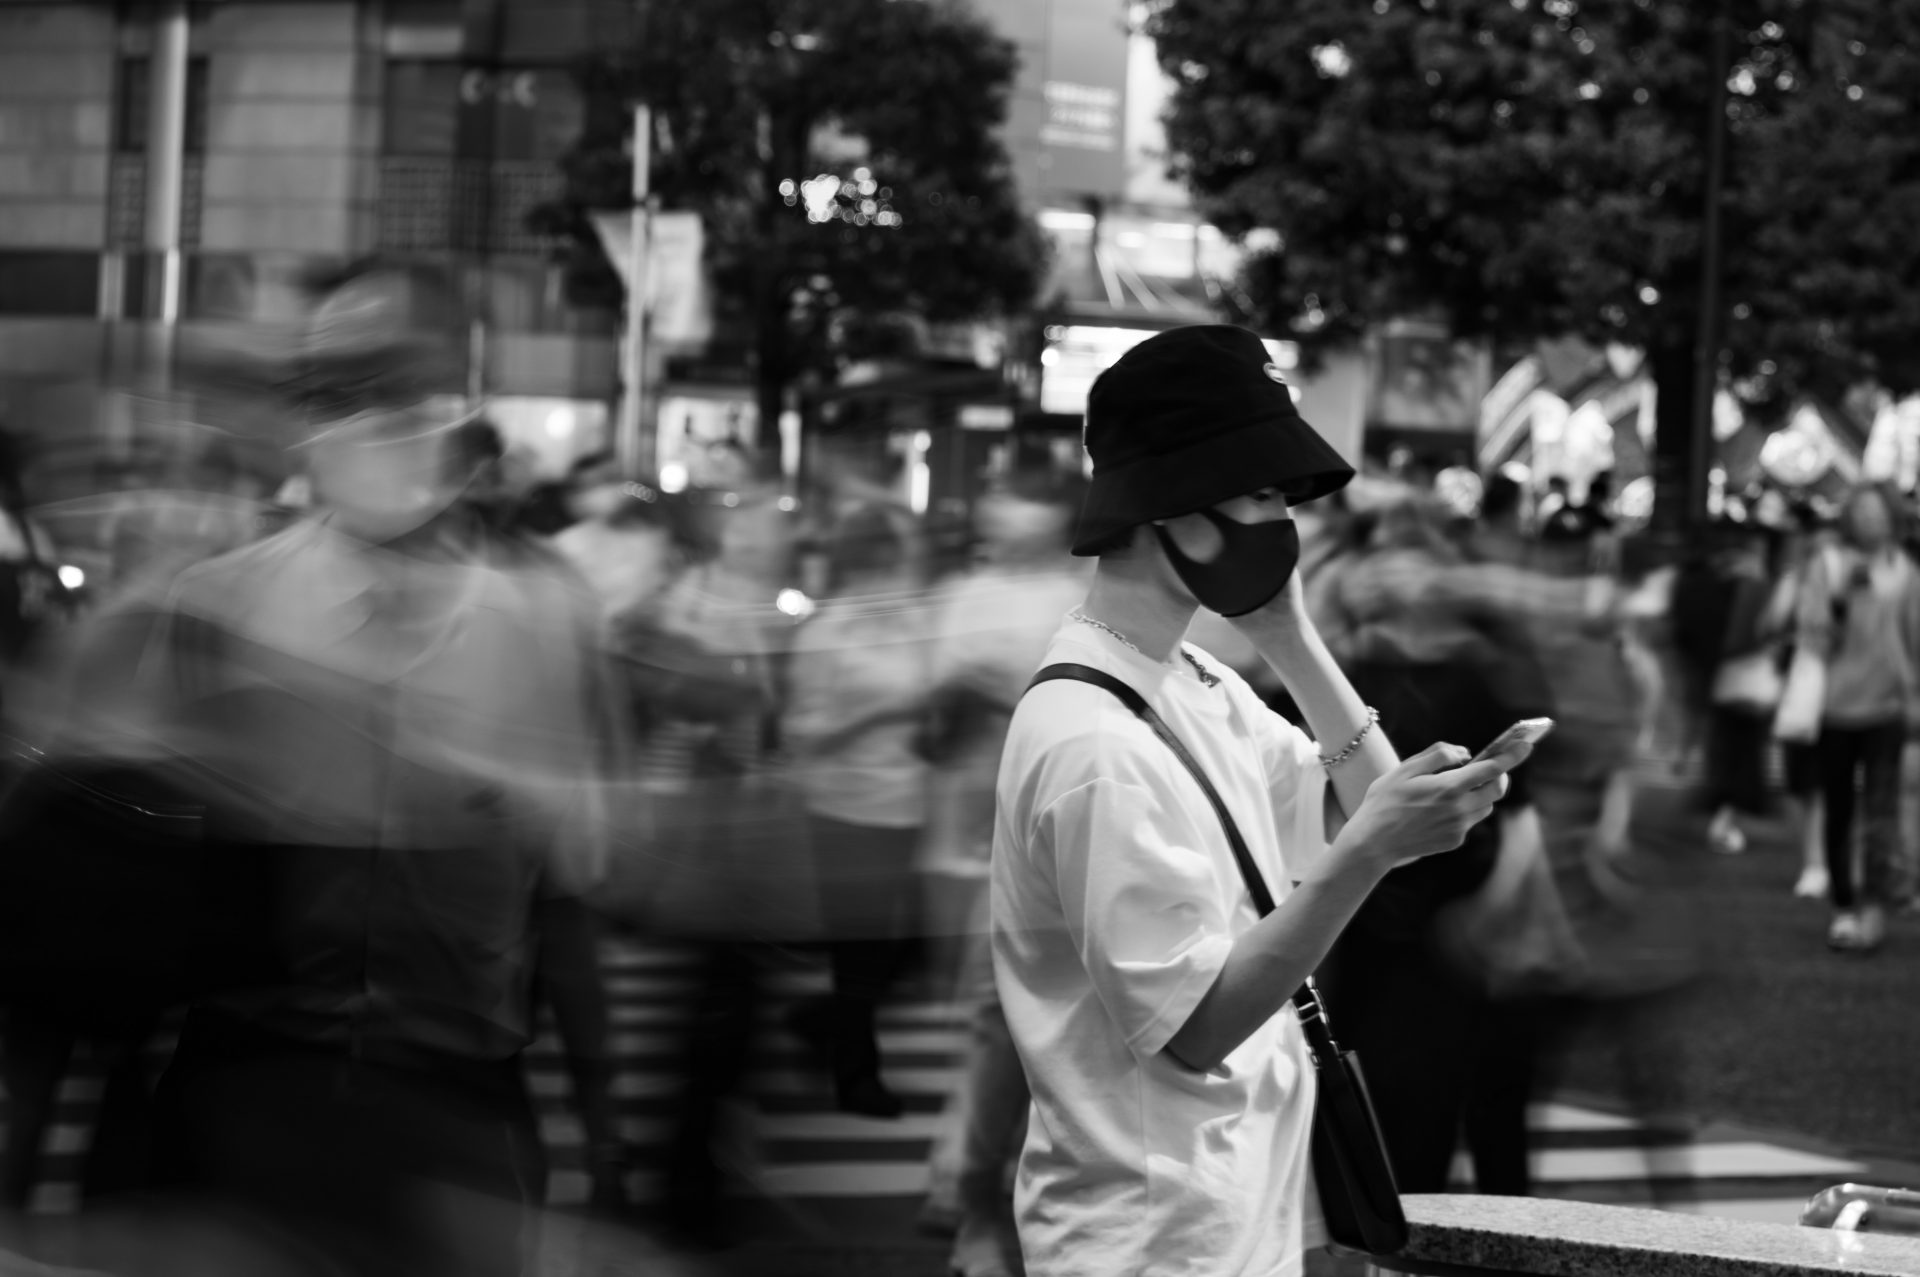 A boy texting on his phone while the pedestrians are passing by behind him. black and white street photography